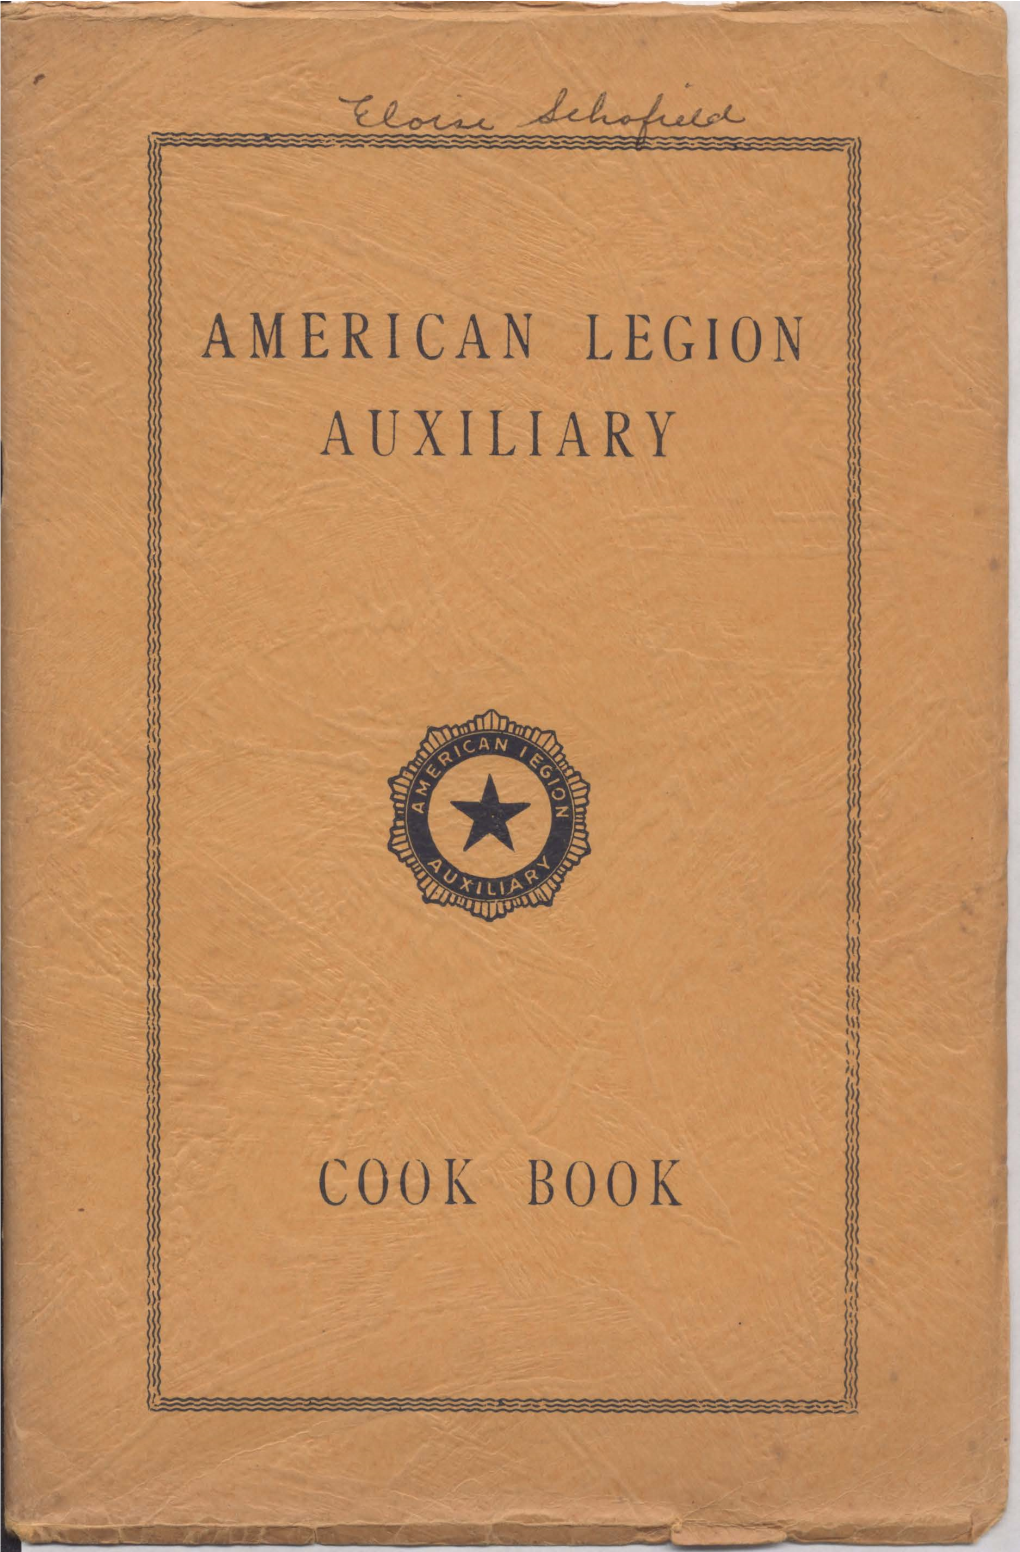 American Legion Auxiliary Cook Book